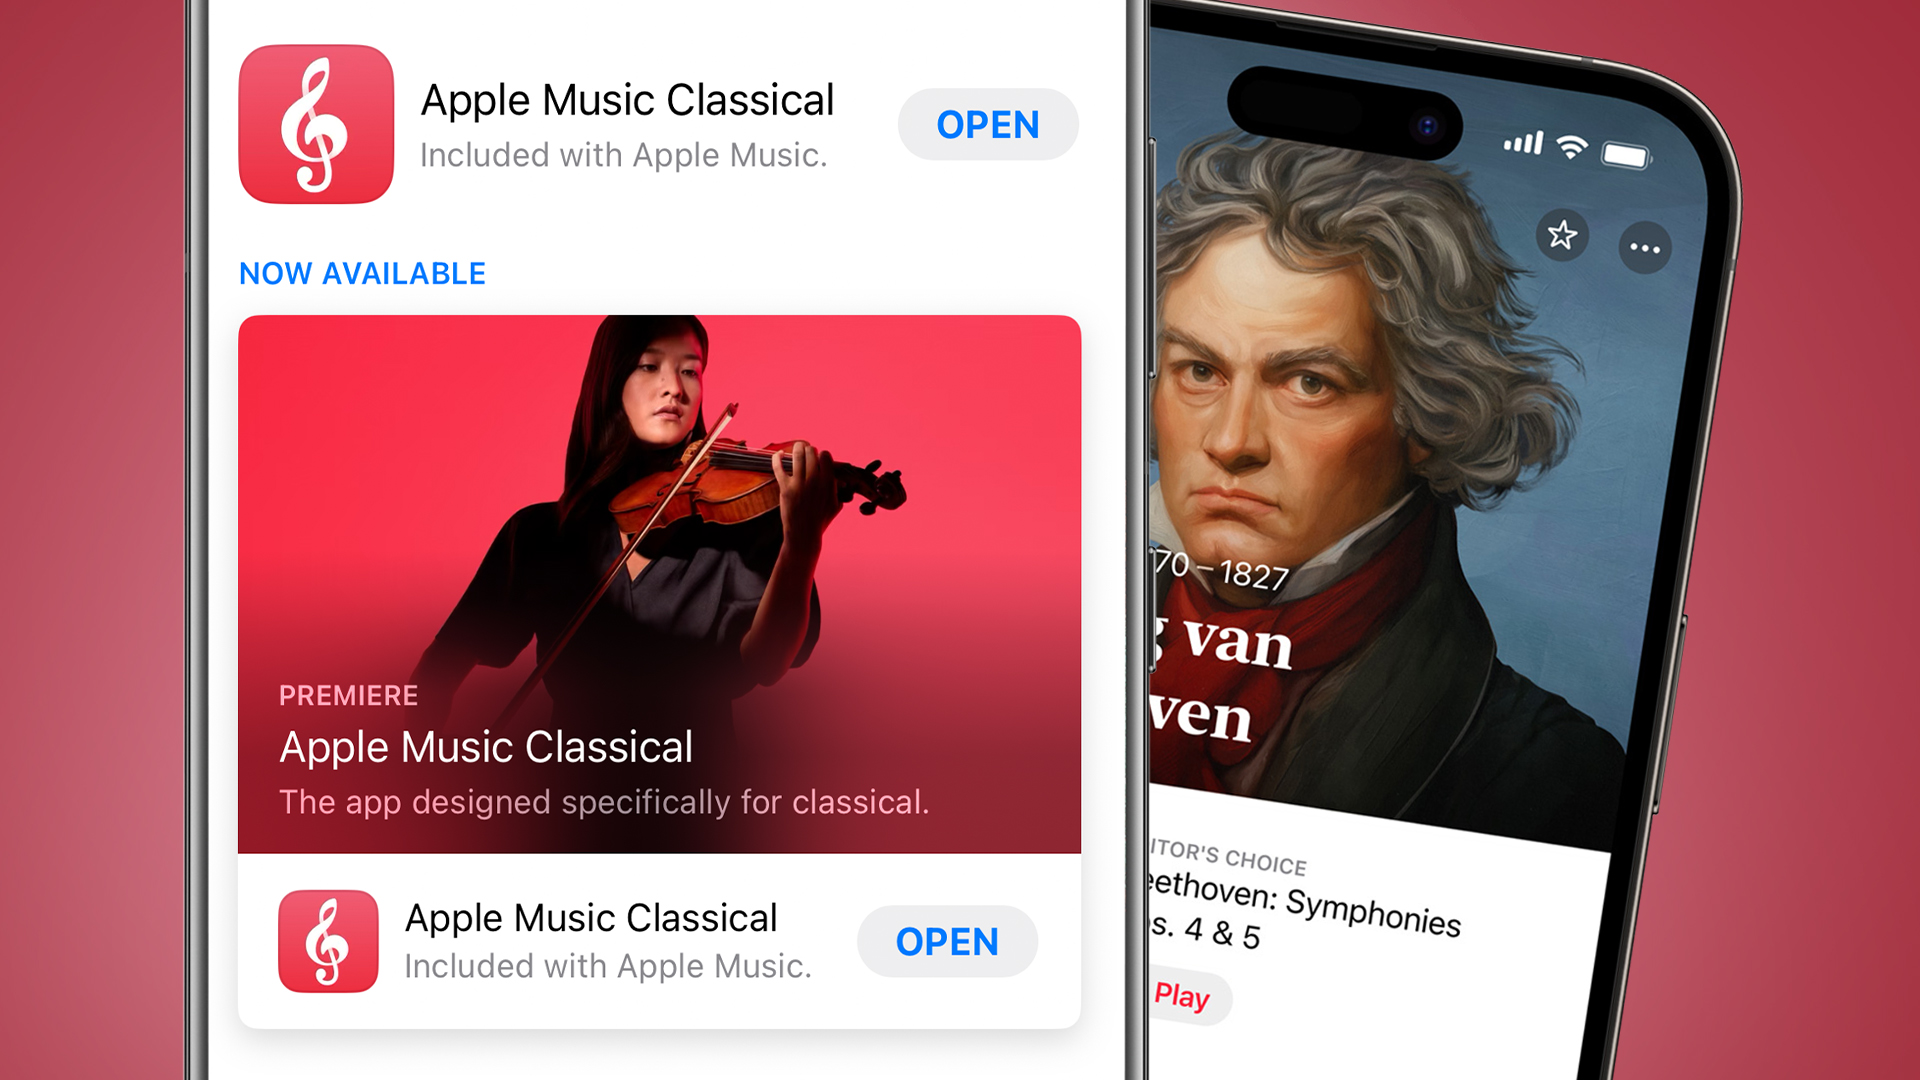 Two iPhones on a red background showing the Apple Music Classical app